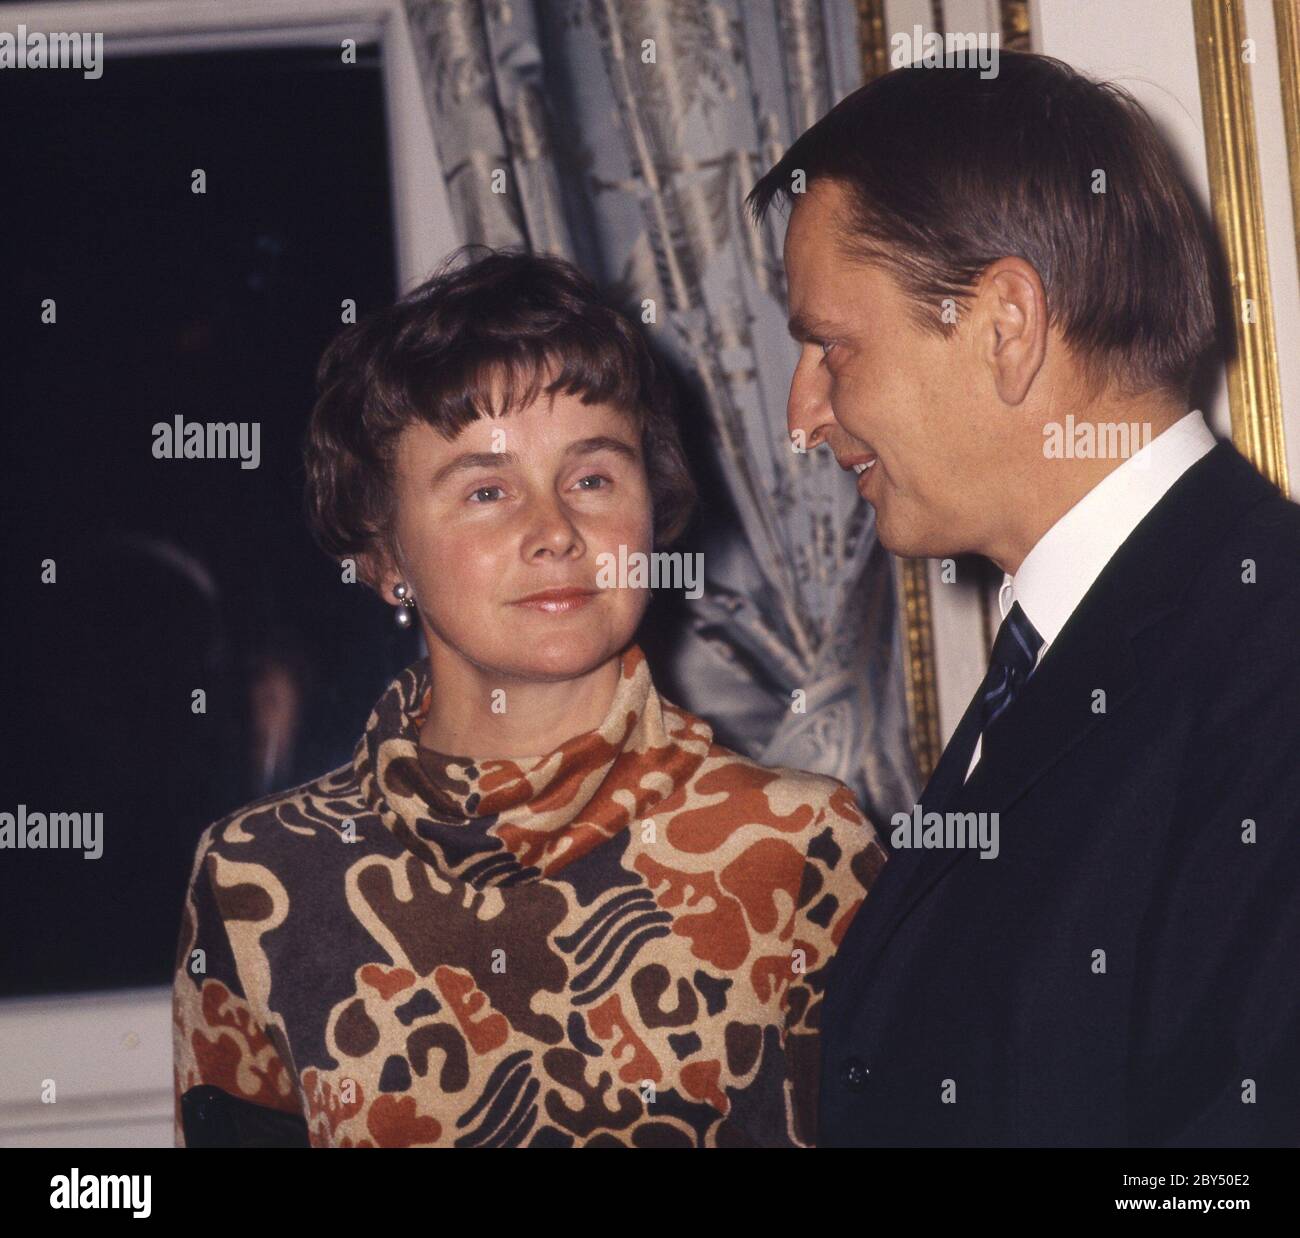 Olof Palme. Swedish social democratic politican and prime minister. Born october 14 1927. Murdered february 28 1985. Pictured here with his wife Lisbet Palme in the 1970s. Stock Photo